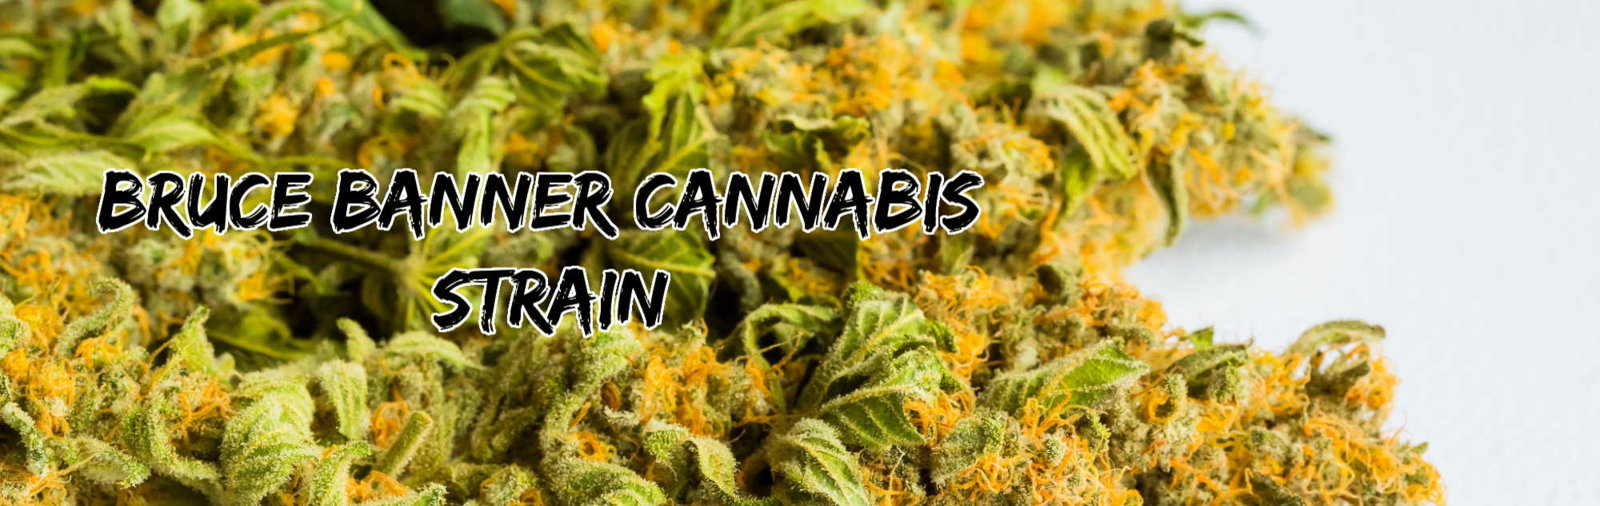 image of bruce banner cannabis strain